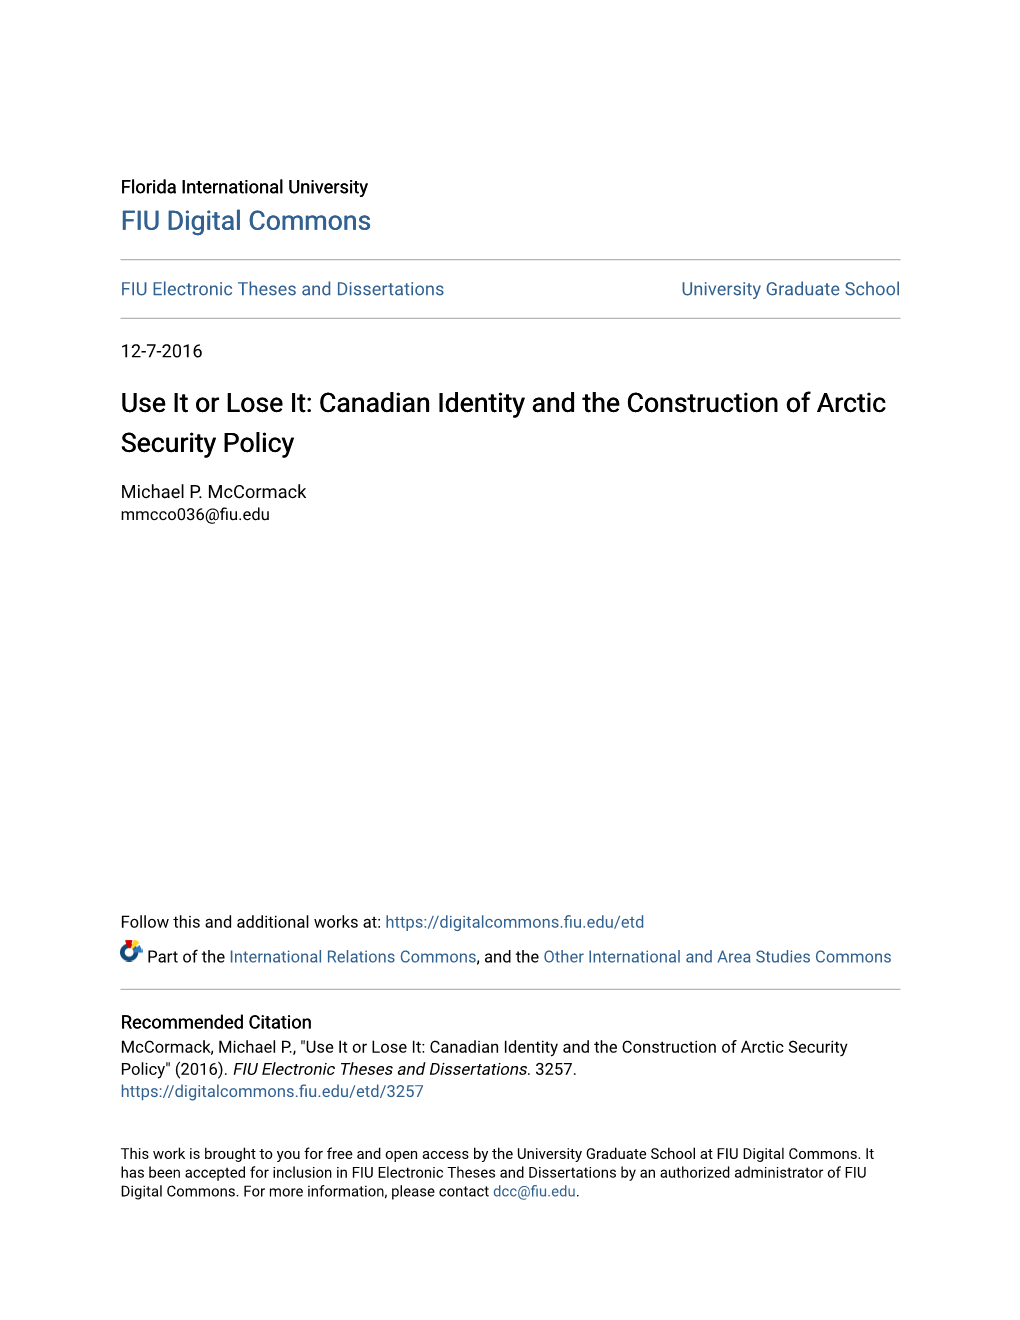 Canadian Identity and the Construction of Arctic Security Policy